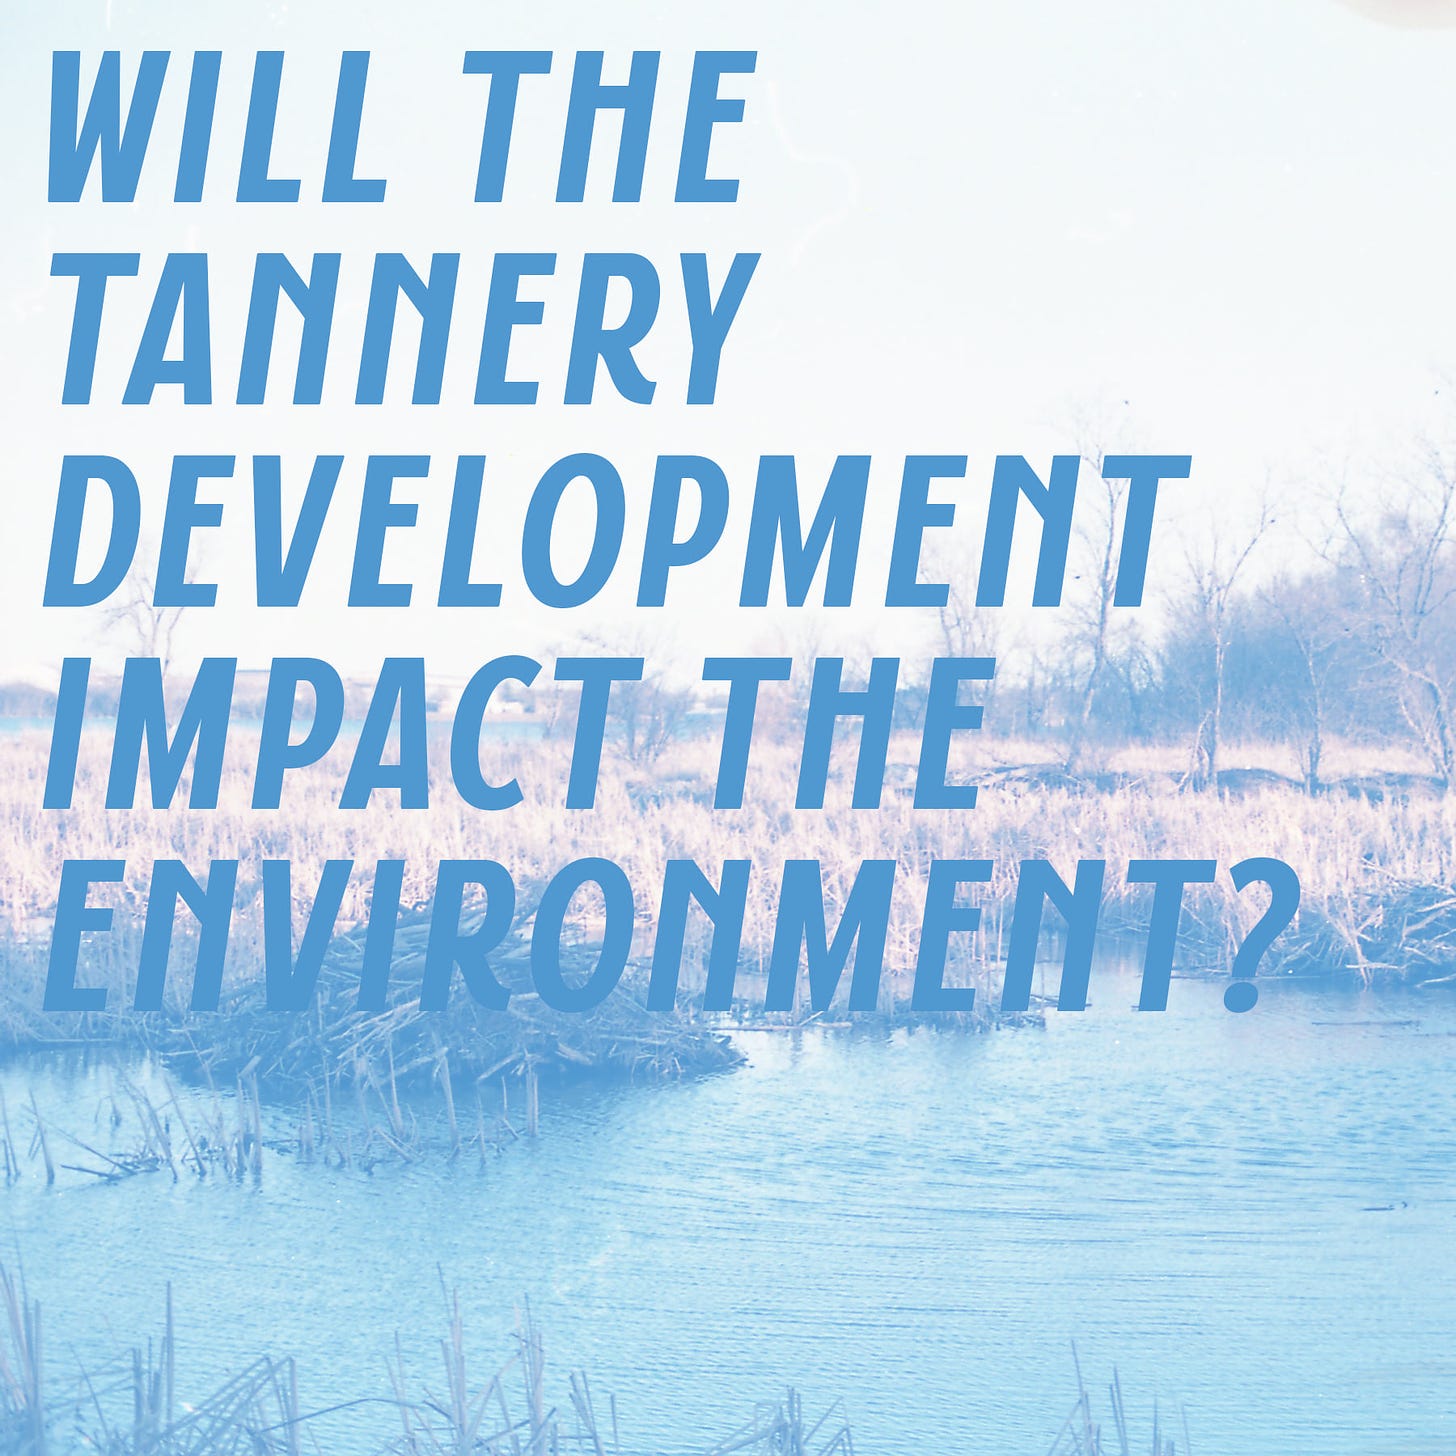 May be an image of sky and text that says 'WILL THE TANNERY DEVELOPMENT IMPACT THE ENVIRONMENT?'